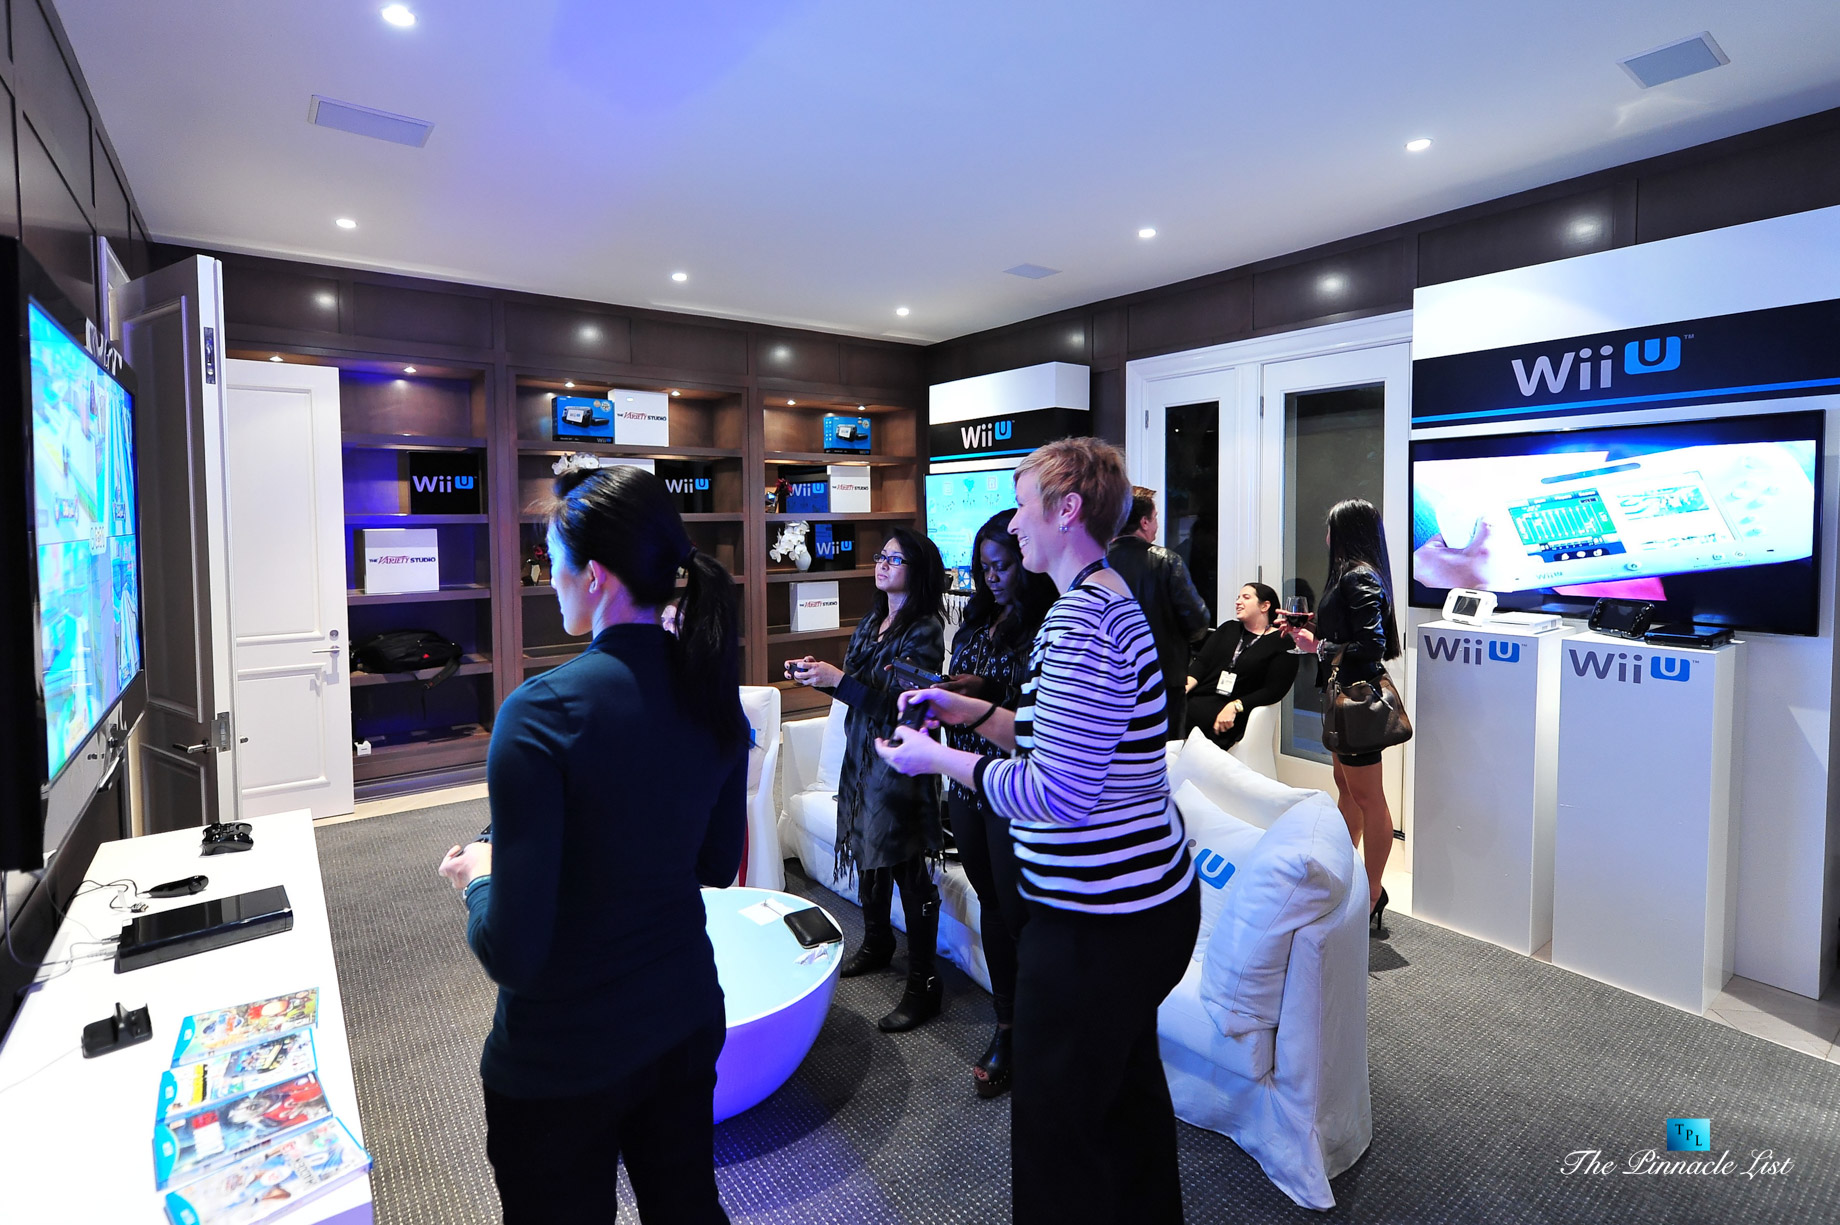 Rolls-Royce Hosts The Variety Studio Event with Nintendo Wii U in Beverly Hills, California